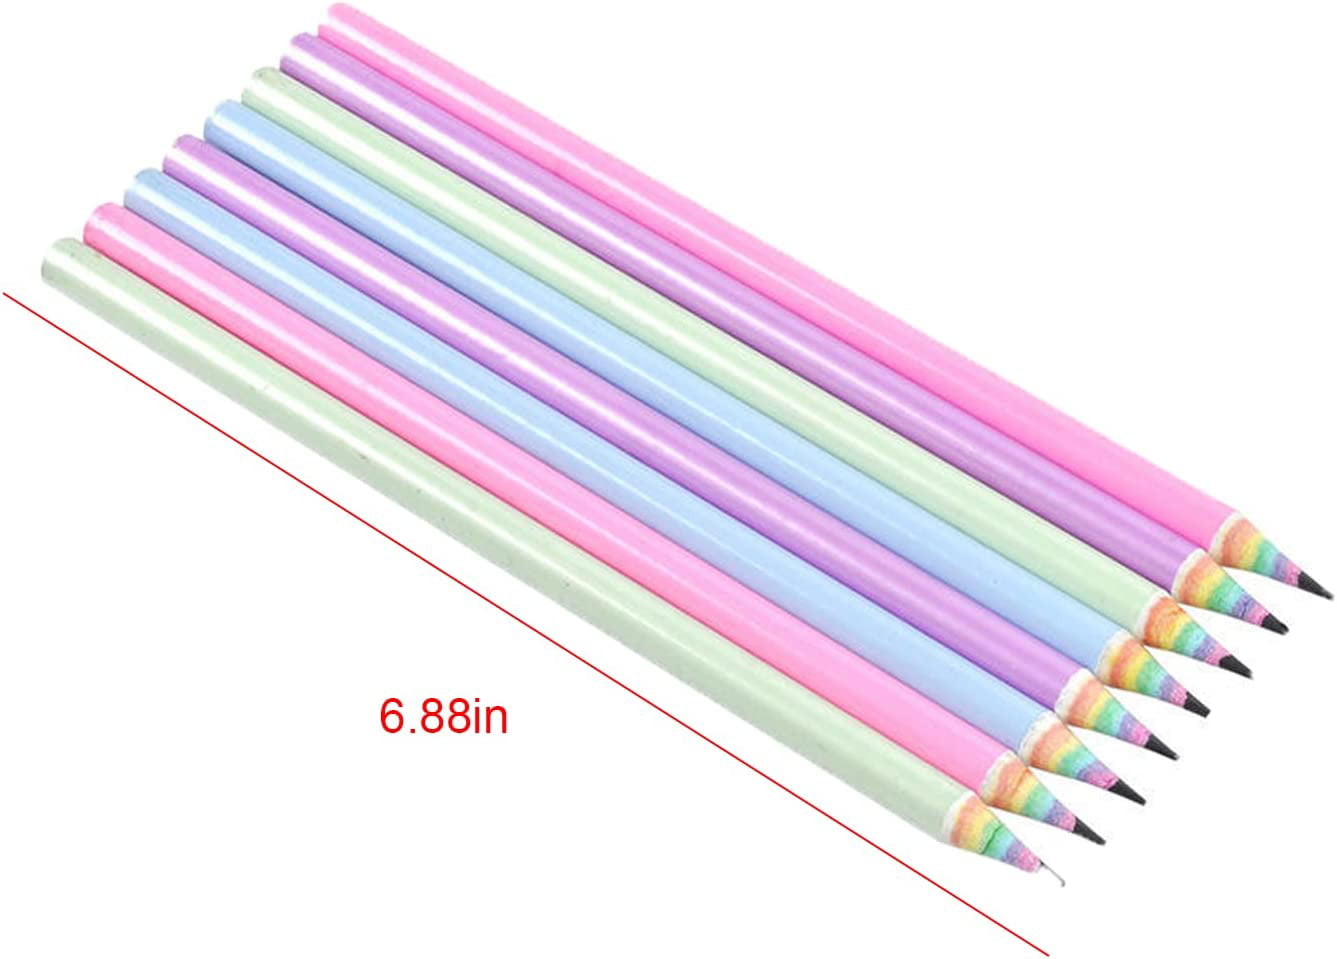 12Pack Rainbow Pencils Set for Kids, HB Cool Novelty Pencils, Safety Eco Friendly Fancy Pretty Pencils, Bright Round Pencils for Home Office School